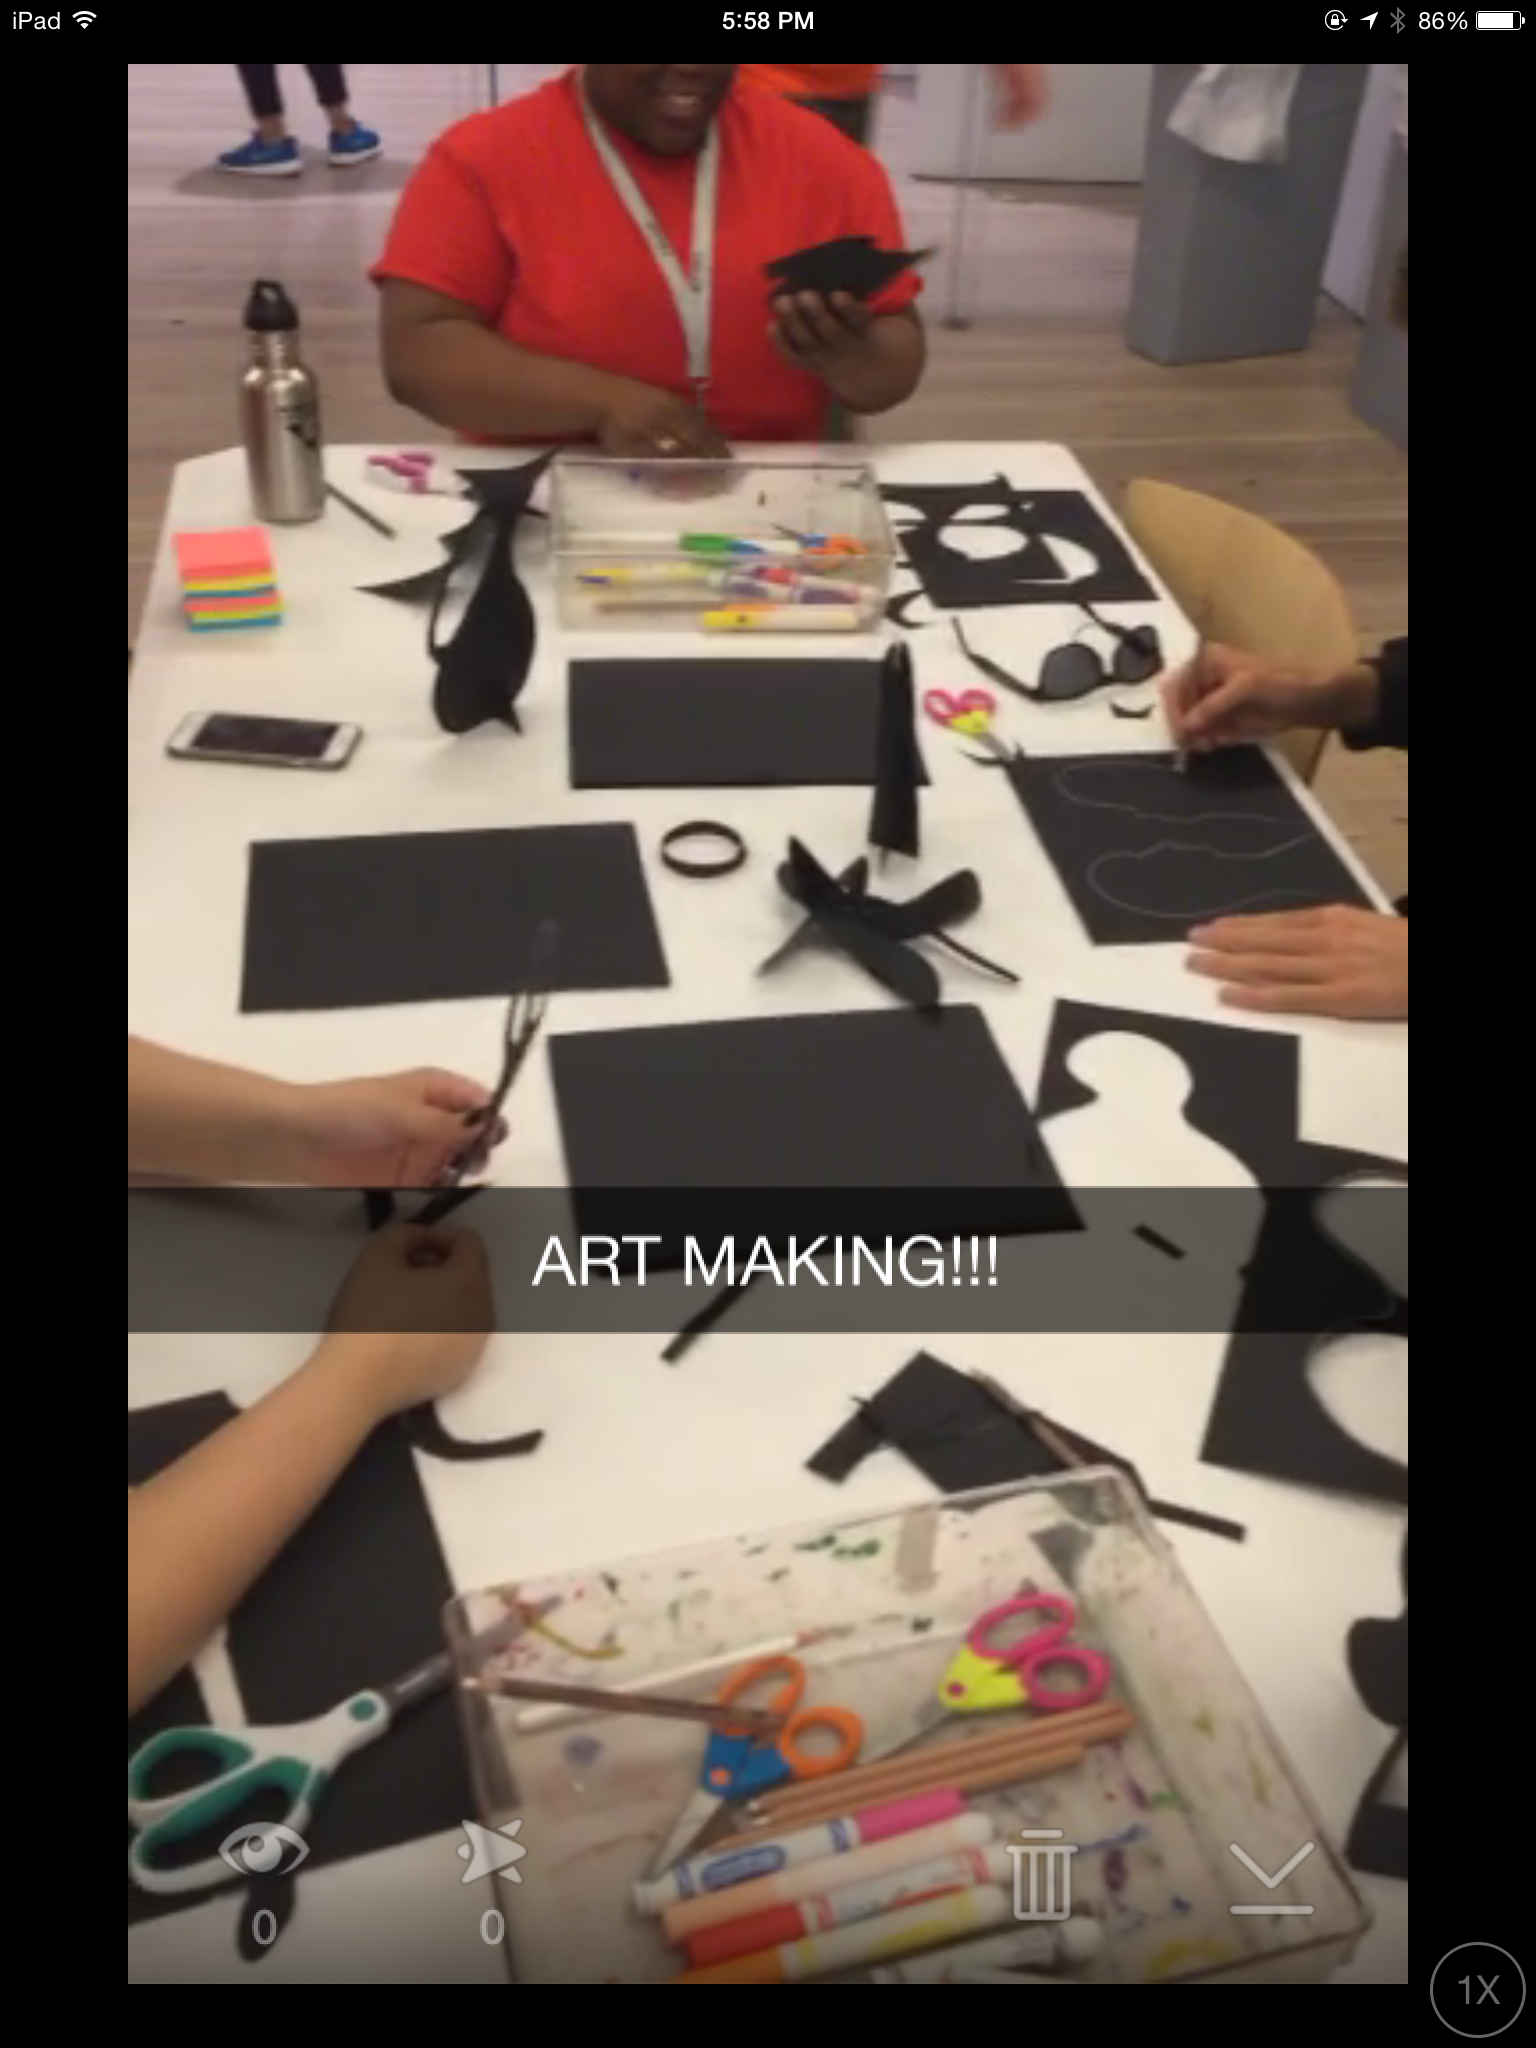 Students make art around a table